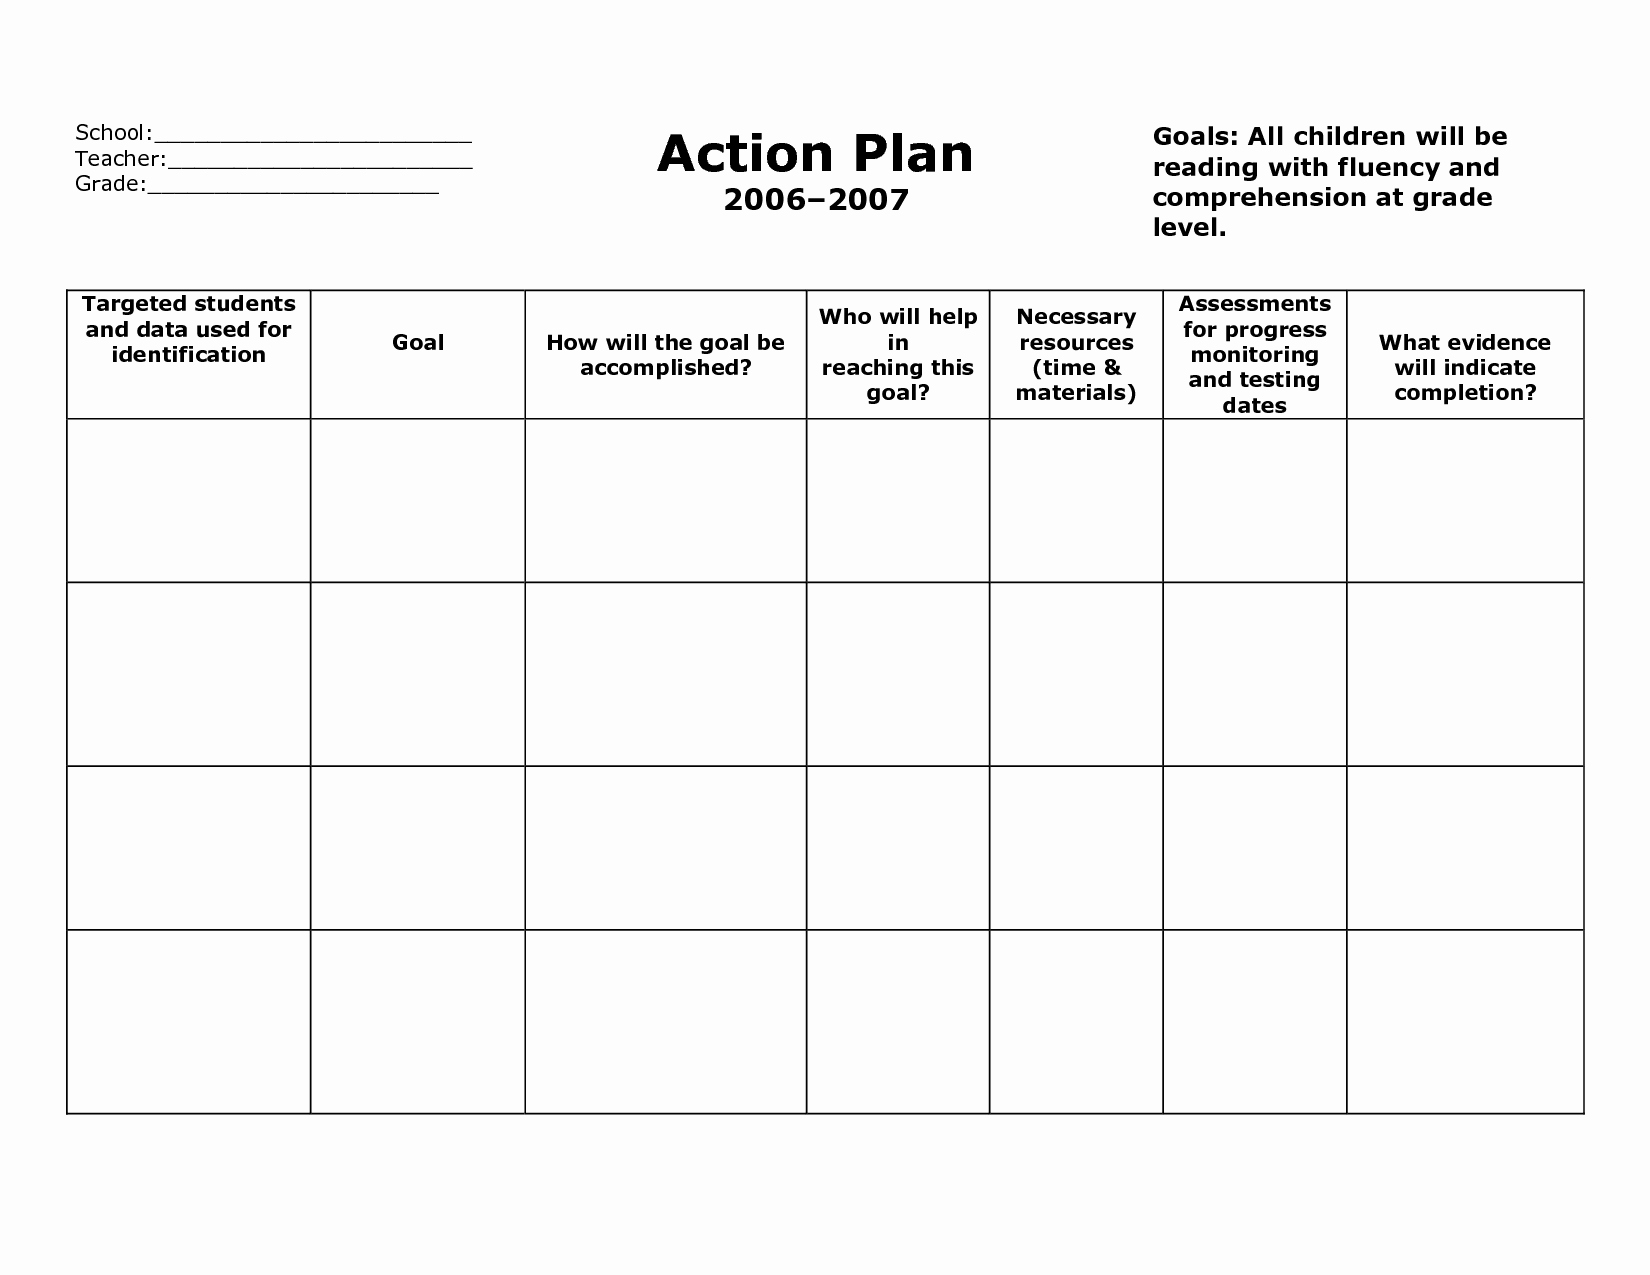 Smart Action Plan Template New Action Plan Template Action Plan format V5fclyv5